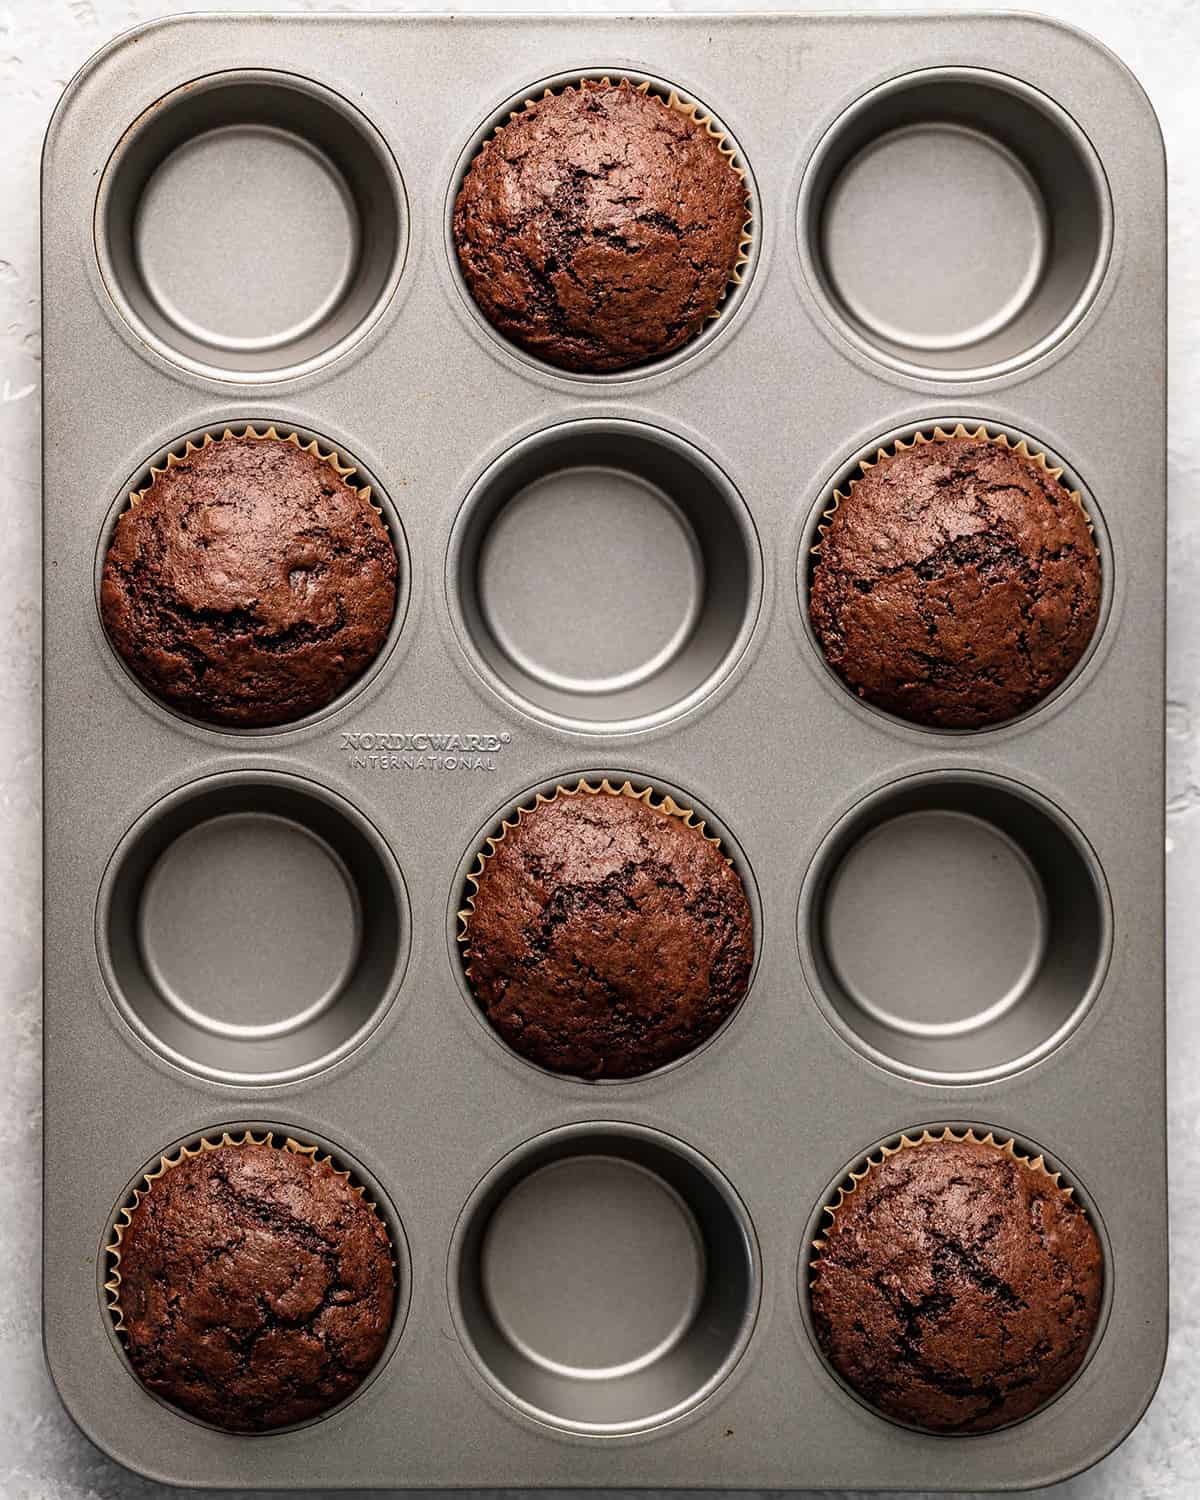 6 chocolate muffins in a muffin pan after baking